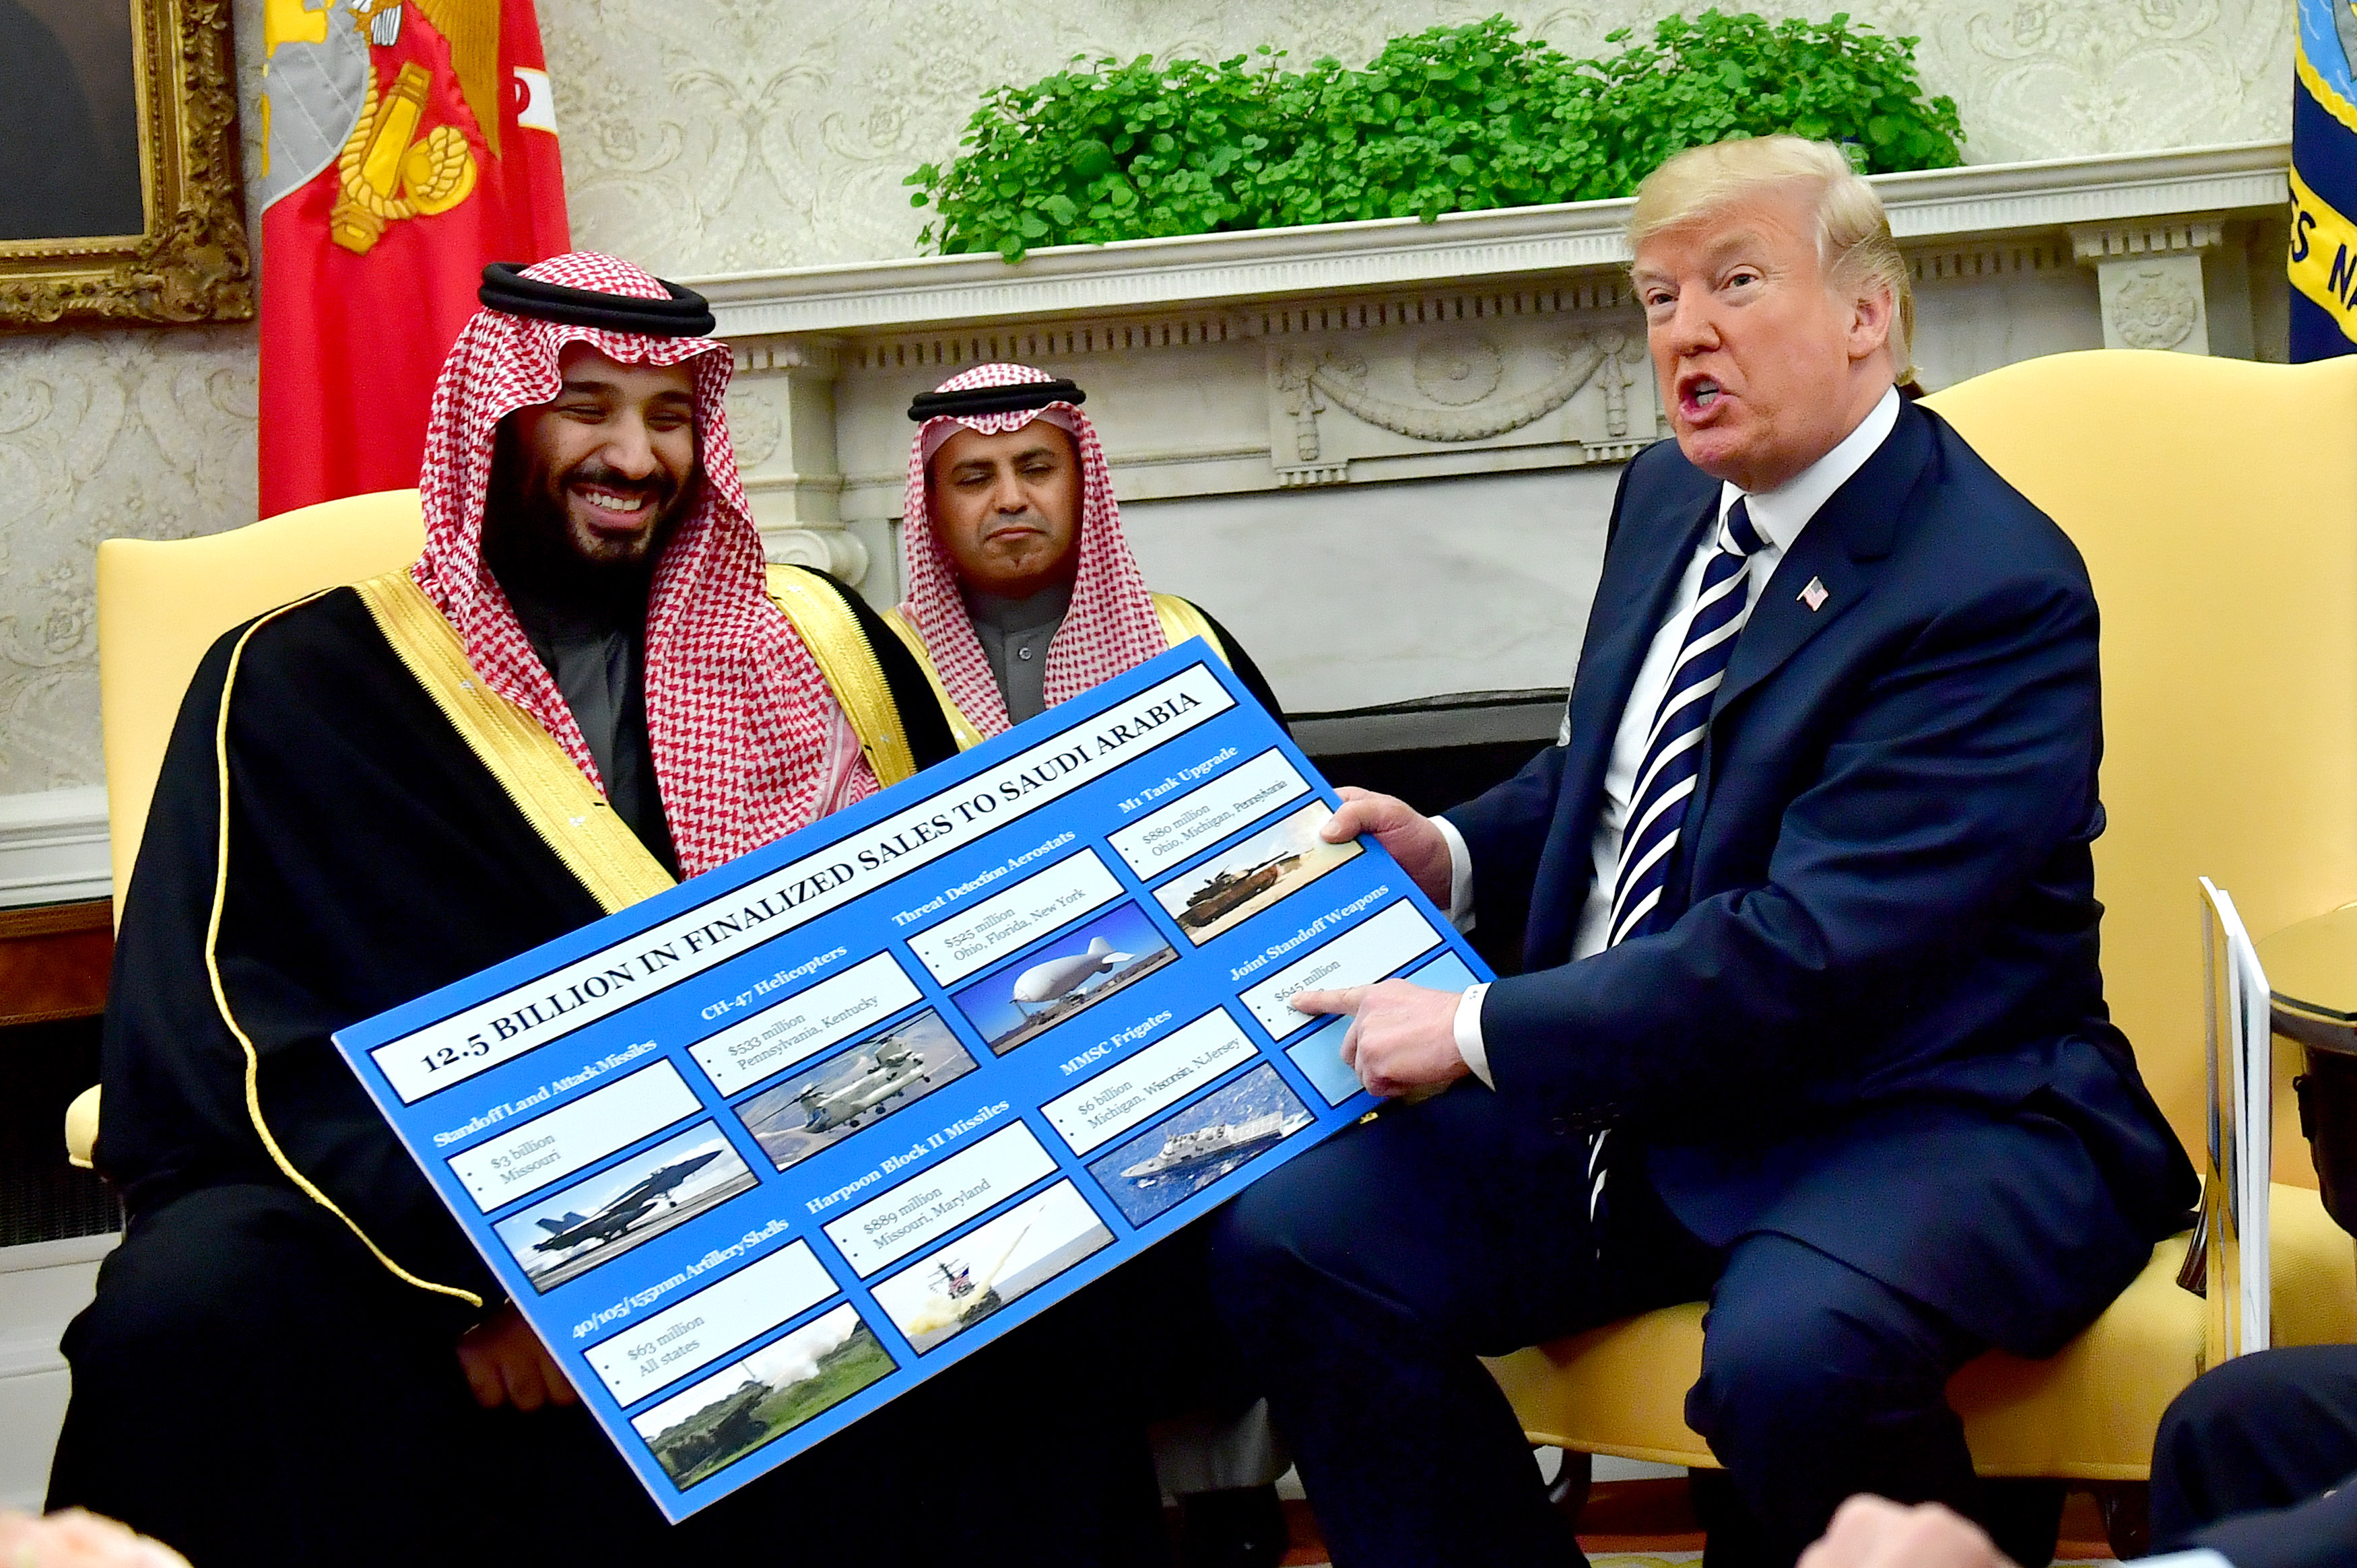 President Donald Trump (R) holds up a chart of military hardware sales as he meets with Crown Prince Mohammed bin Salman of the Kingdom of Saudi Arabia in the Oval Office at the White House on March 20, 2018 in Washington, D.C. Kevin Dietsch-Pool/Getty Images